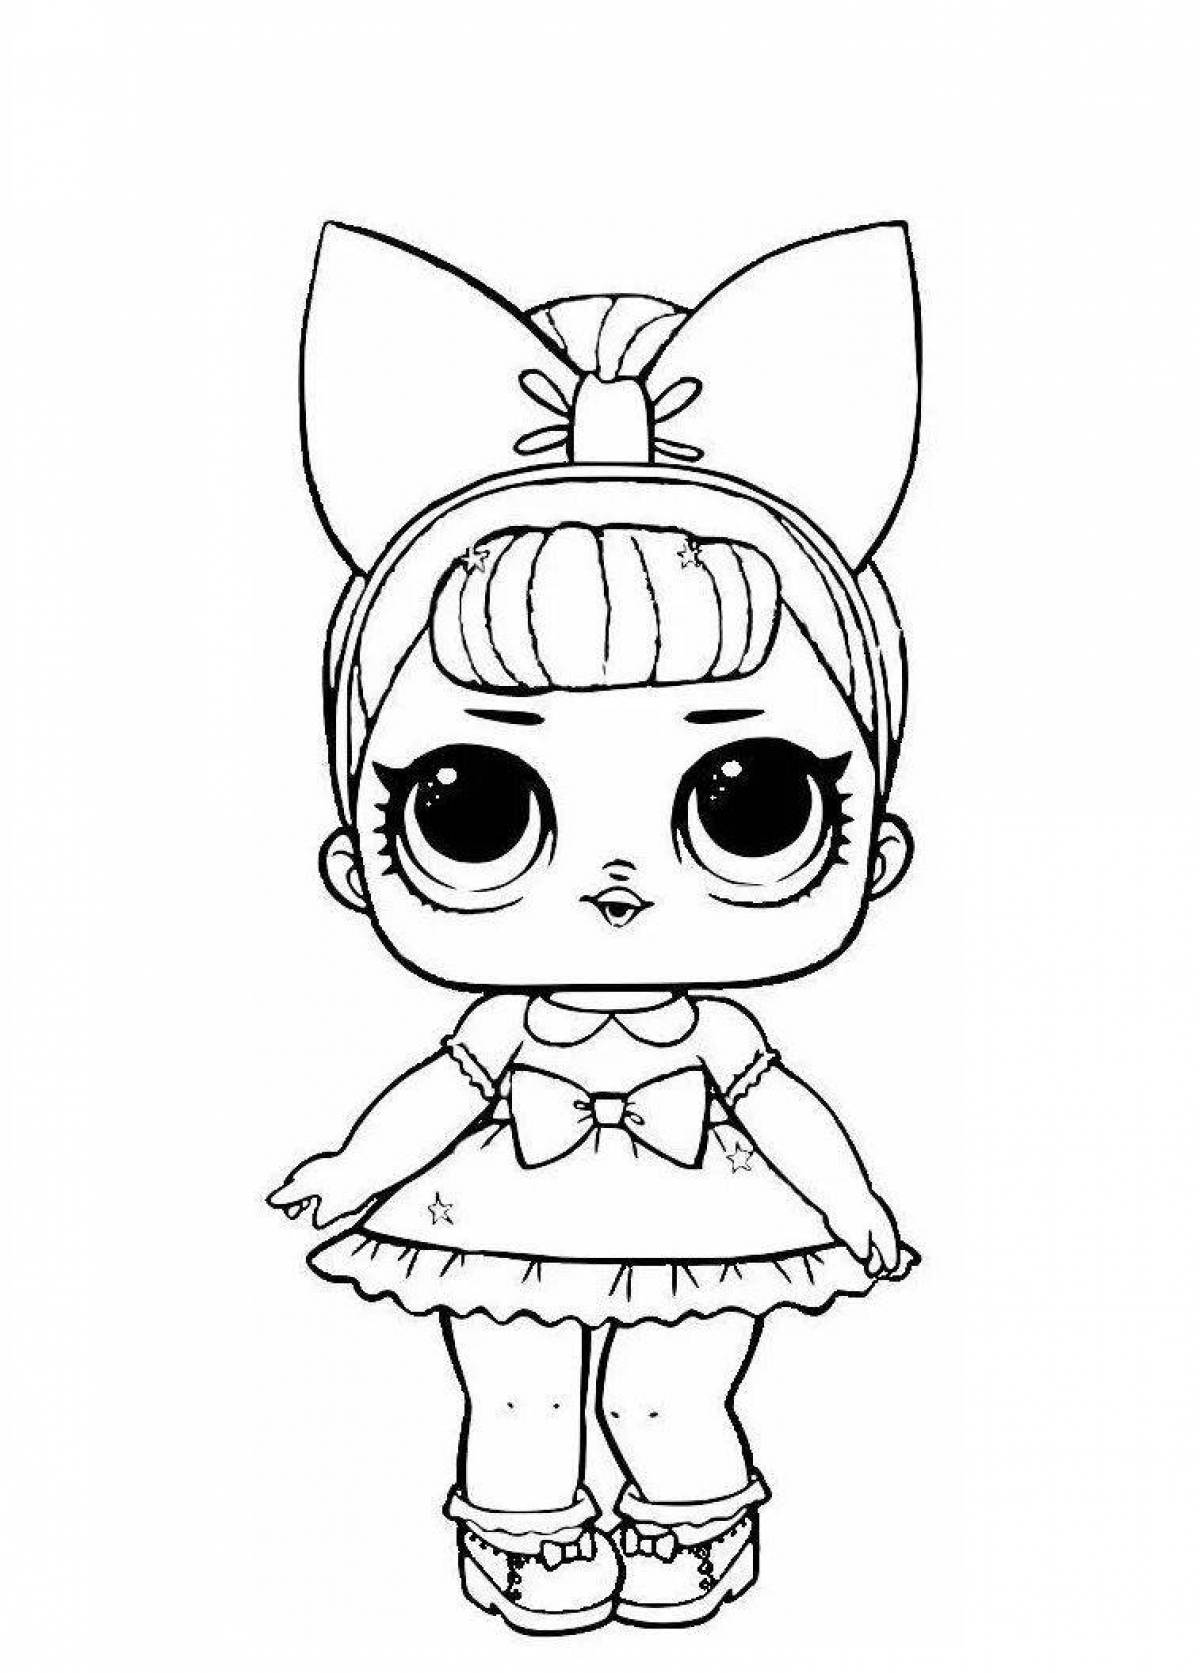 Colorful dolls turn on dolls lol coloring page